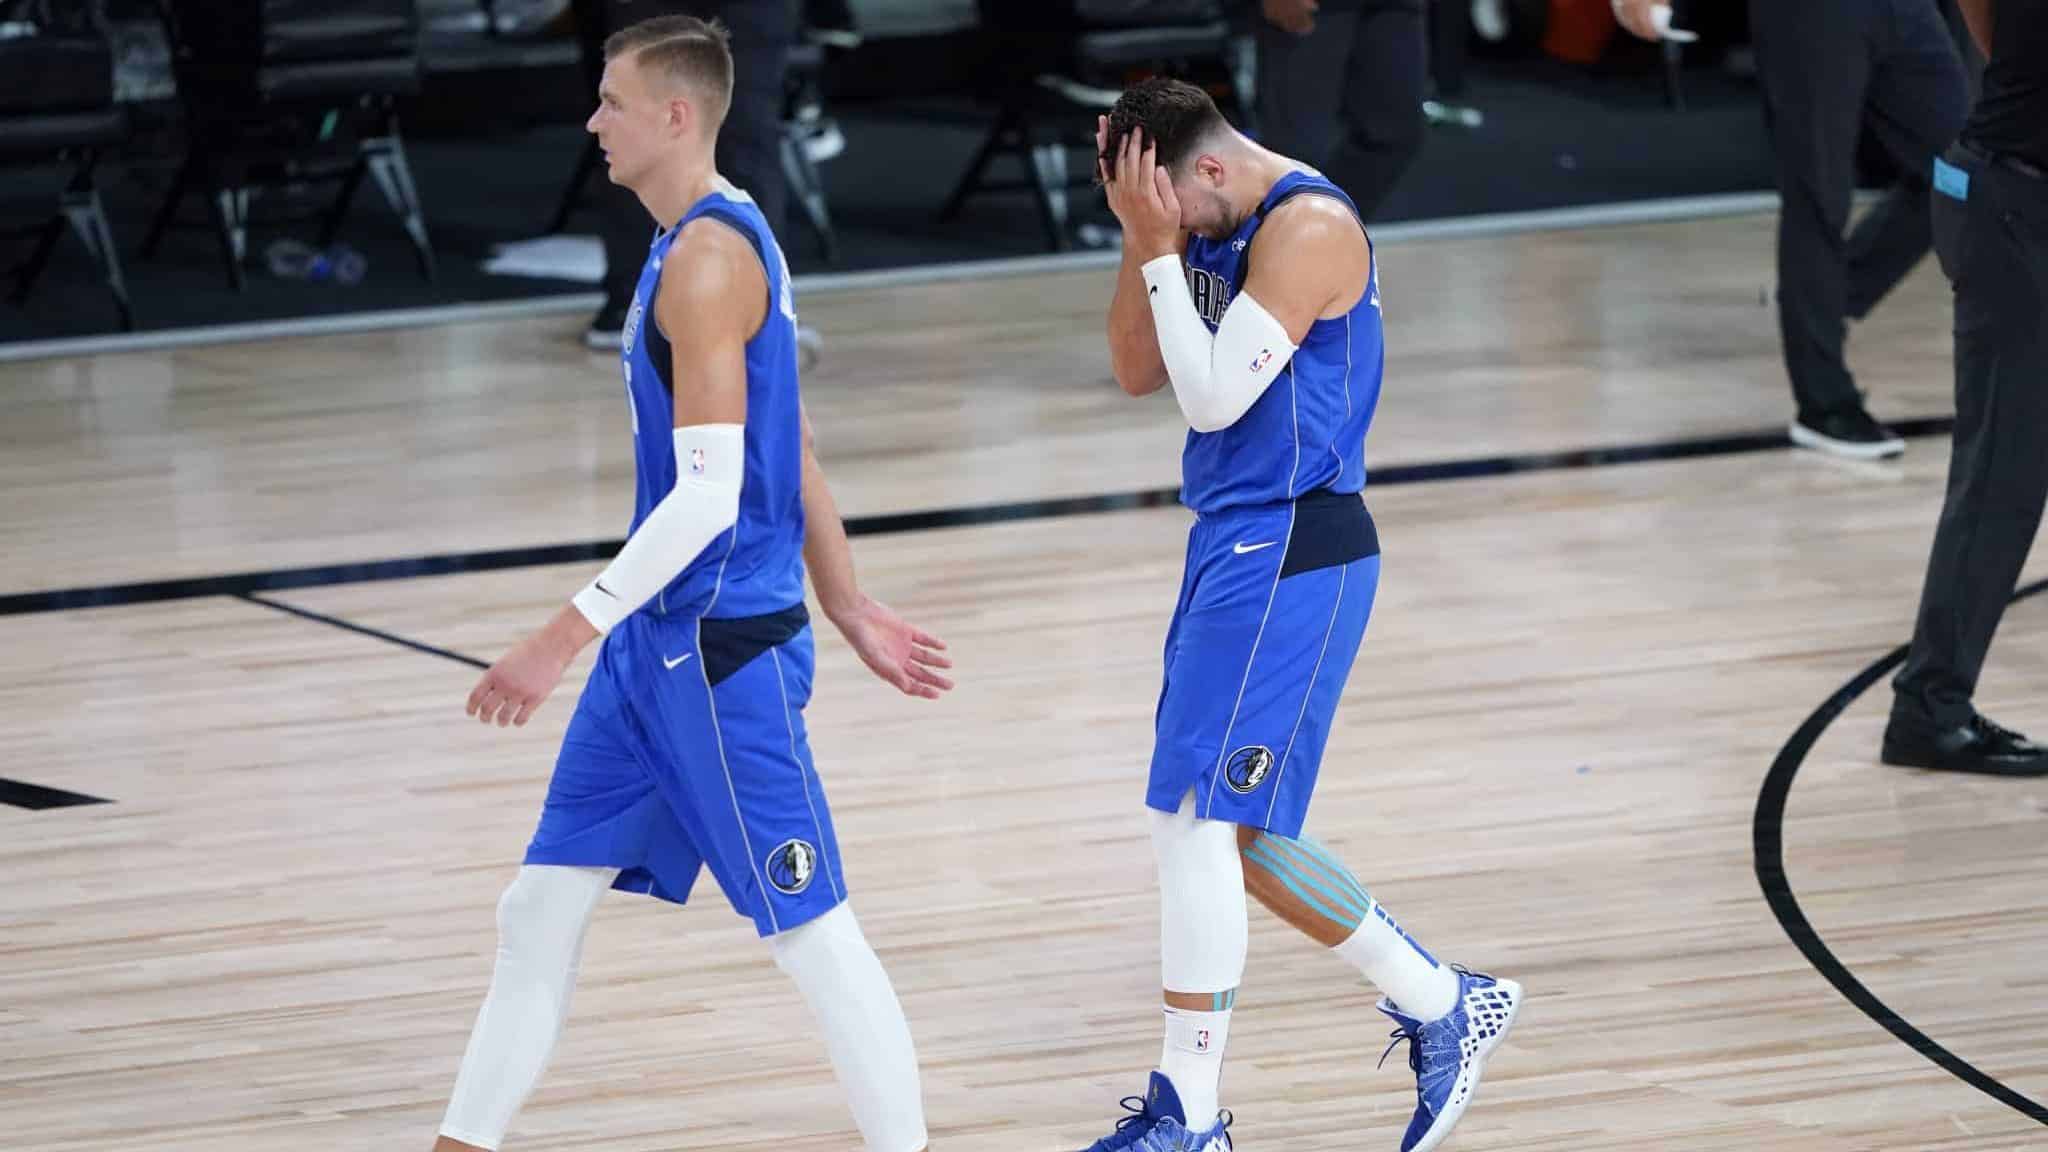 LAKE BUENA VISTA, FLORIDA - AUGUST 21: Kristaps Porzingis #6 and Luka Doncic #77 of the Dallas Mavericks leave the court after the first half of Game Three of the first round of the playoffs at the AdventHealth Arena at the ESPN Wide World Of Sports Complex on August 21, 2020 in Lake Buena Vista, Florida. NOTE TO USER: User expressly acknowledges and agrees that, by downloading and or using this photograph, User is consenting to the terms and conditions of the Getty Images License Agreement.